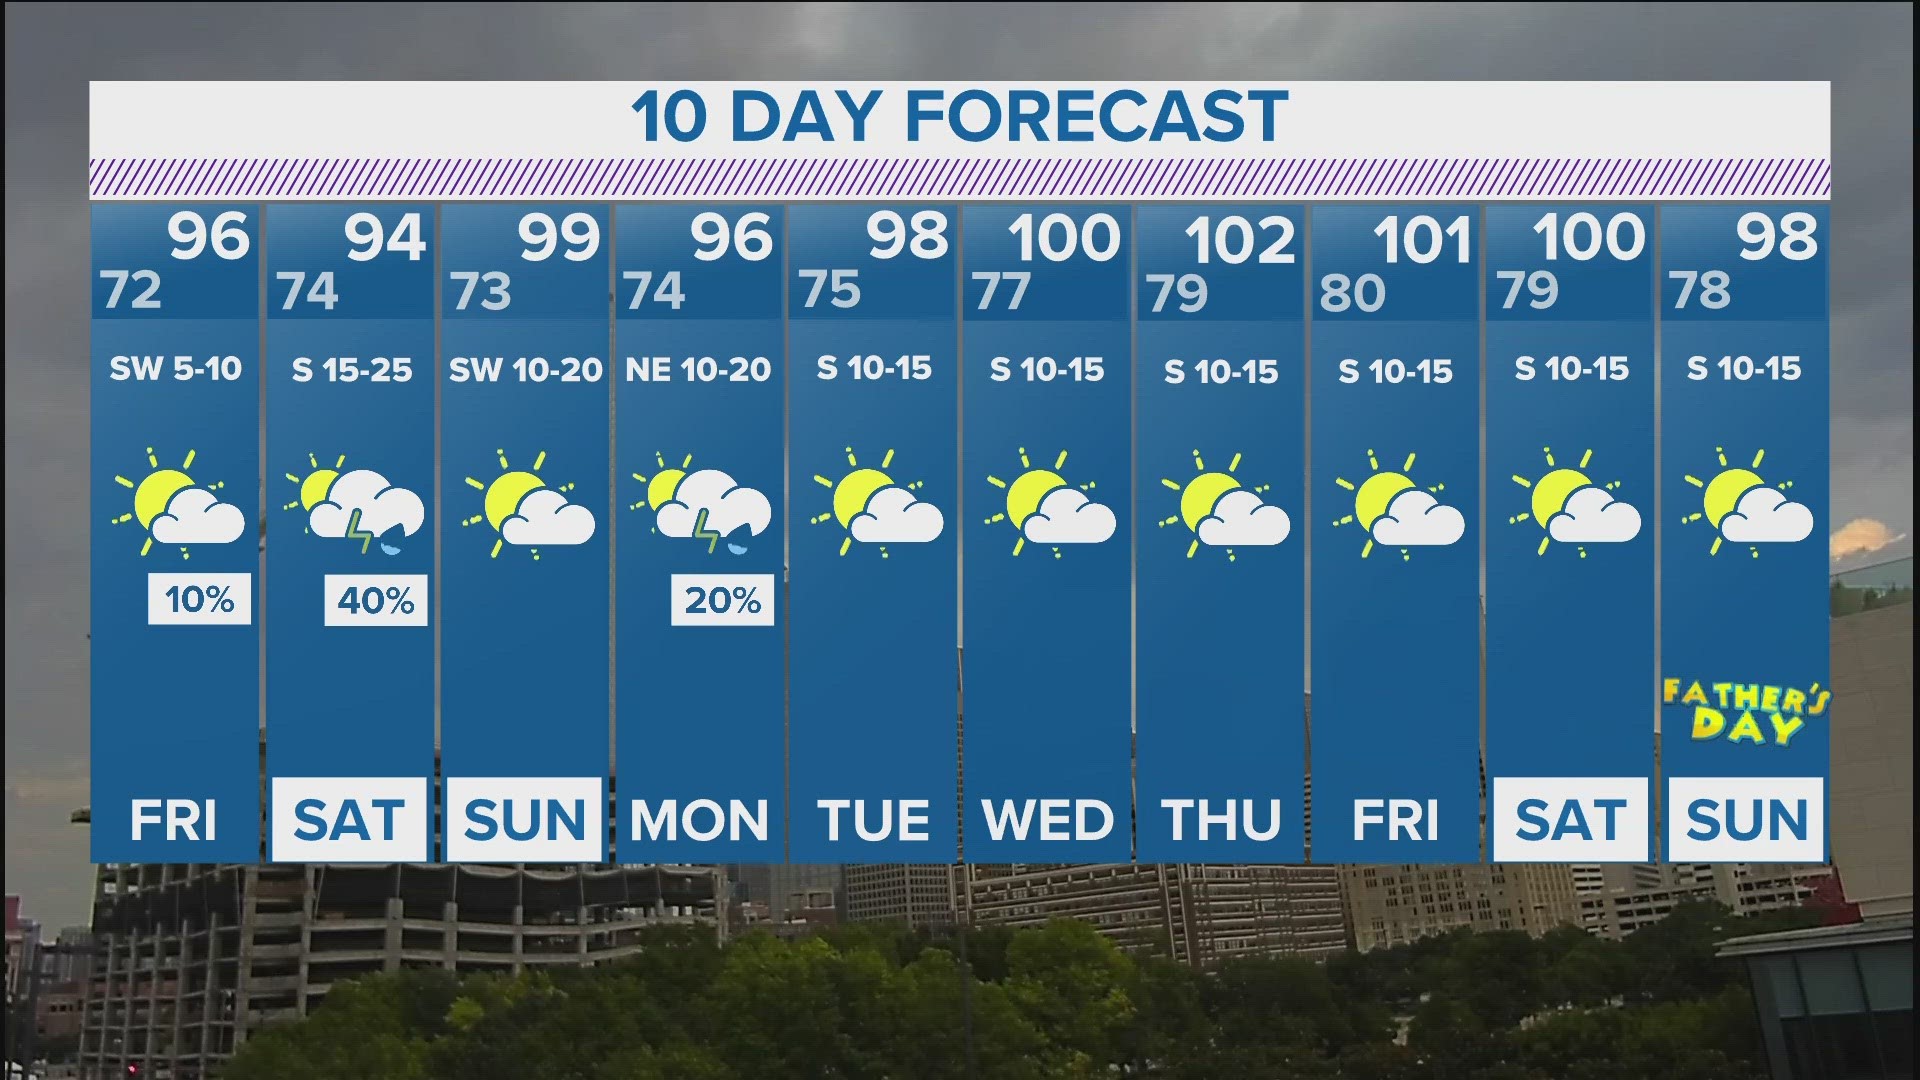 Temperatures are expected to reach the triple digits by Wednesday.